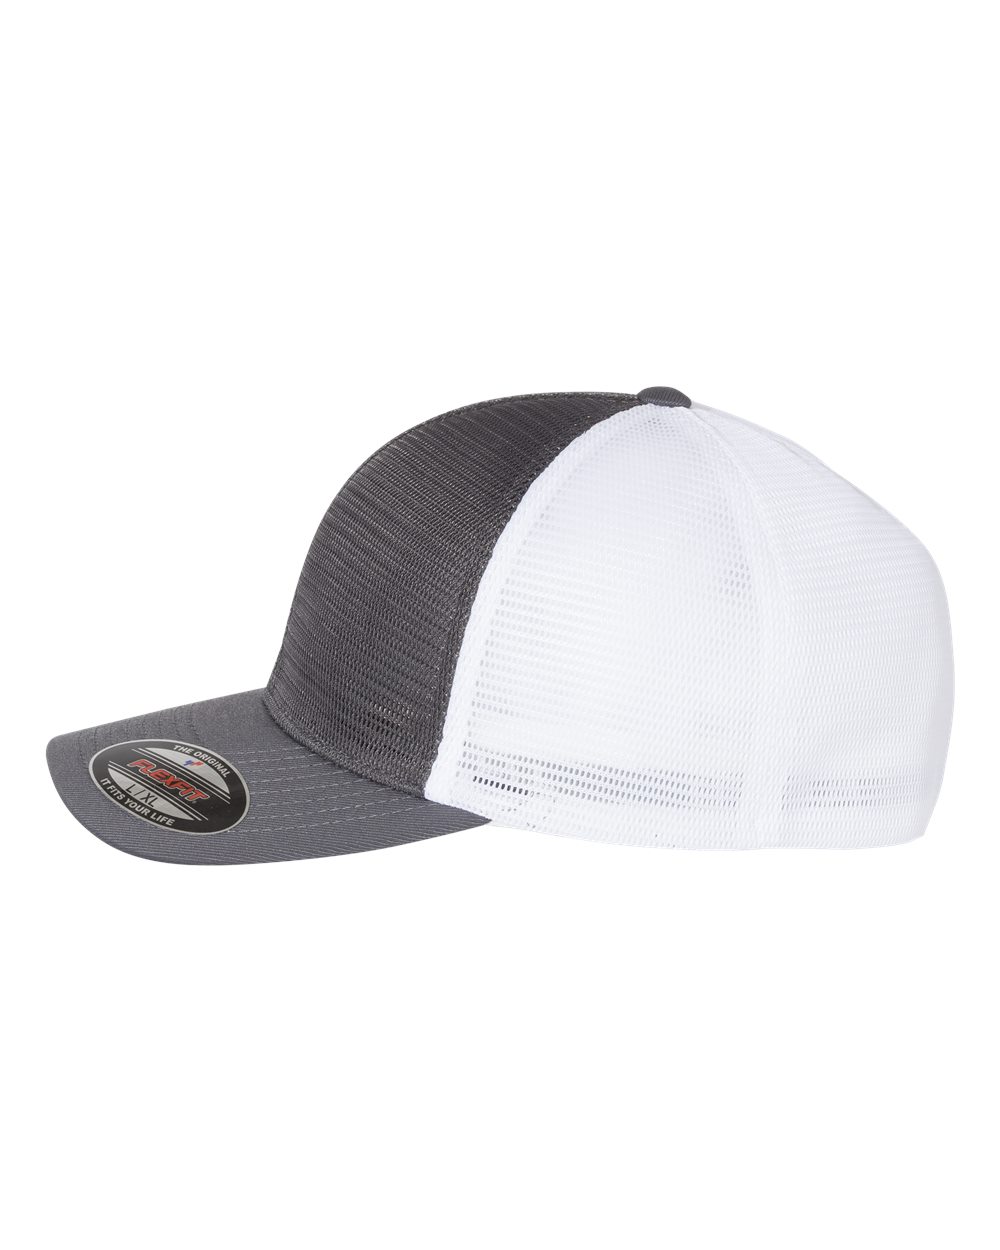 Charcoal/White Trucker Hat-Fitted